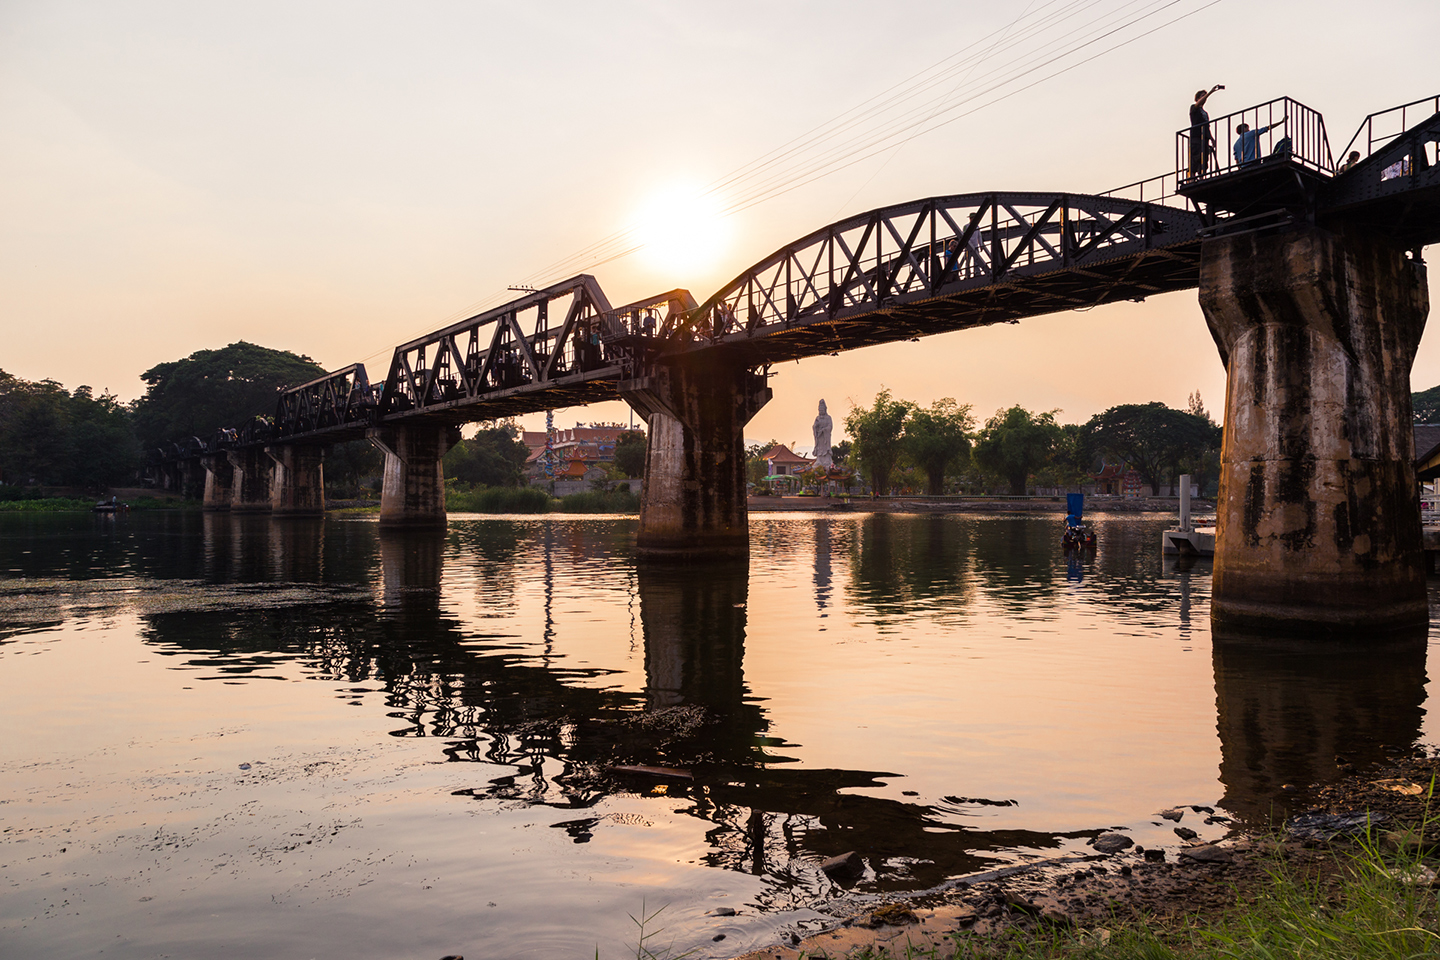 Arguably it is one of the most iconic bridges in the world, The Bridge on the River Kwai still bears testament of the atrocities committed during the WWII.  Enveloped in a warm sunset light, the bridge came to life and was indeed the peak of my day.